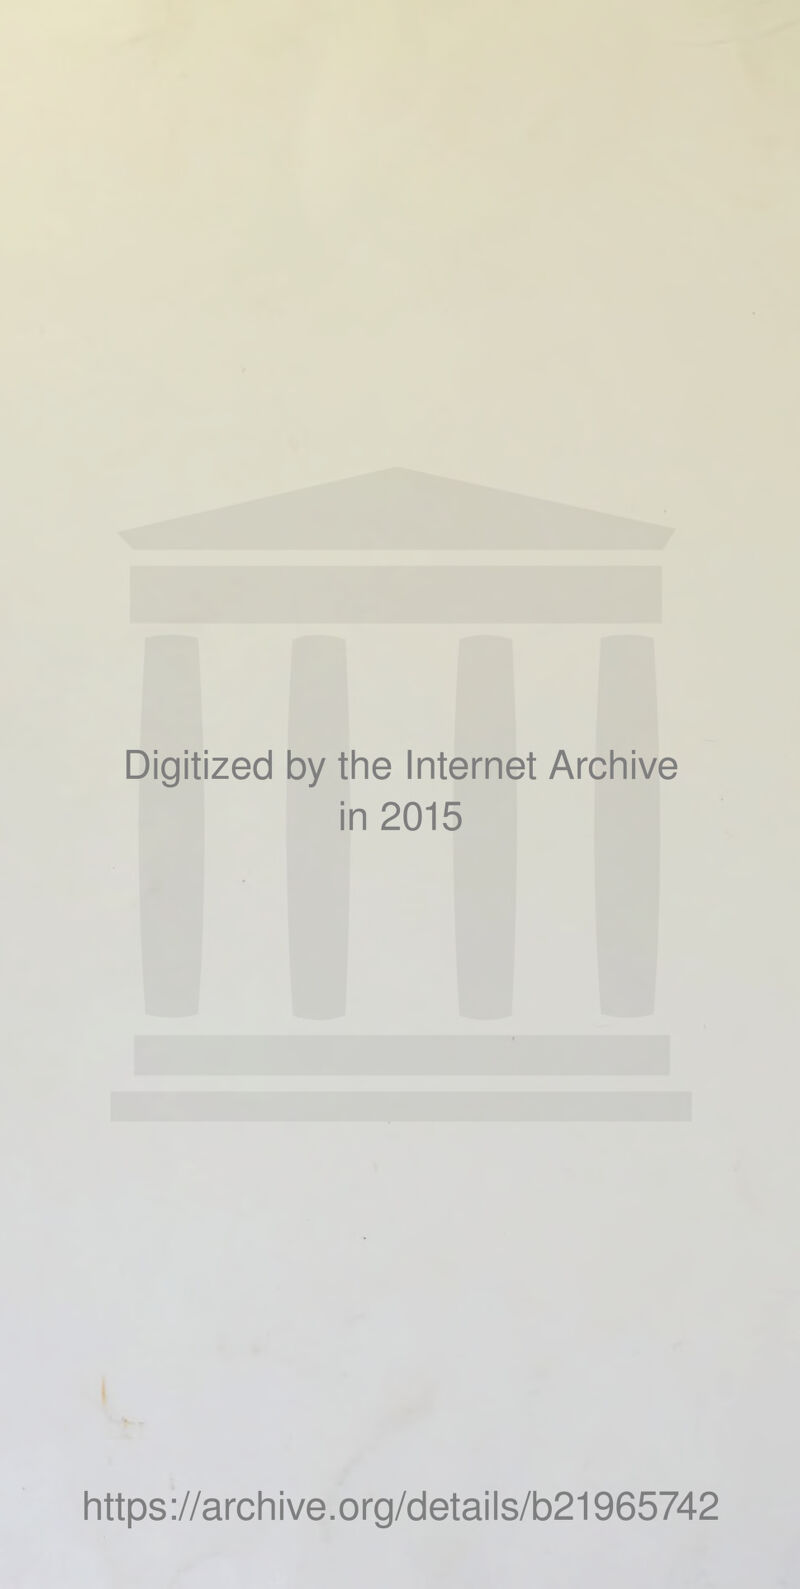 Digitized by the Internet Archive in 2015 I https://archive.org/detalls/b21965742